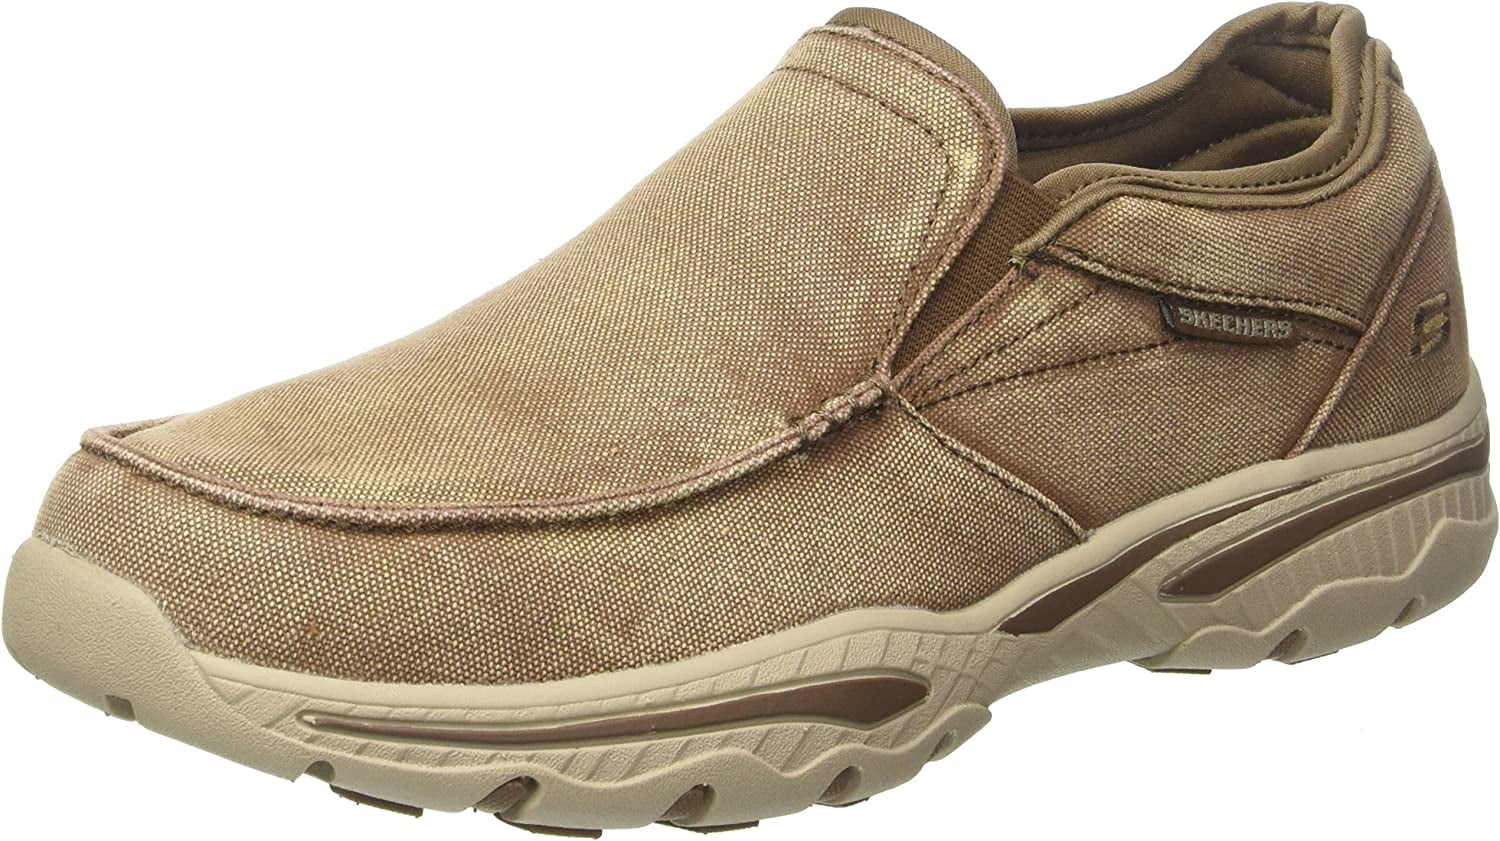 Skechers Men's Relaxed Fit-Creston-Moseco Moccasin, Light Brown, 8 M US ...